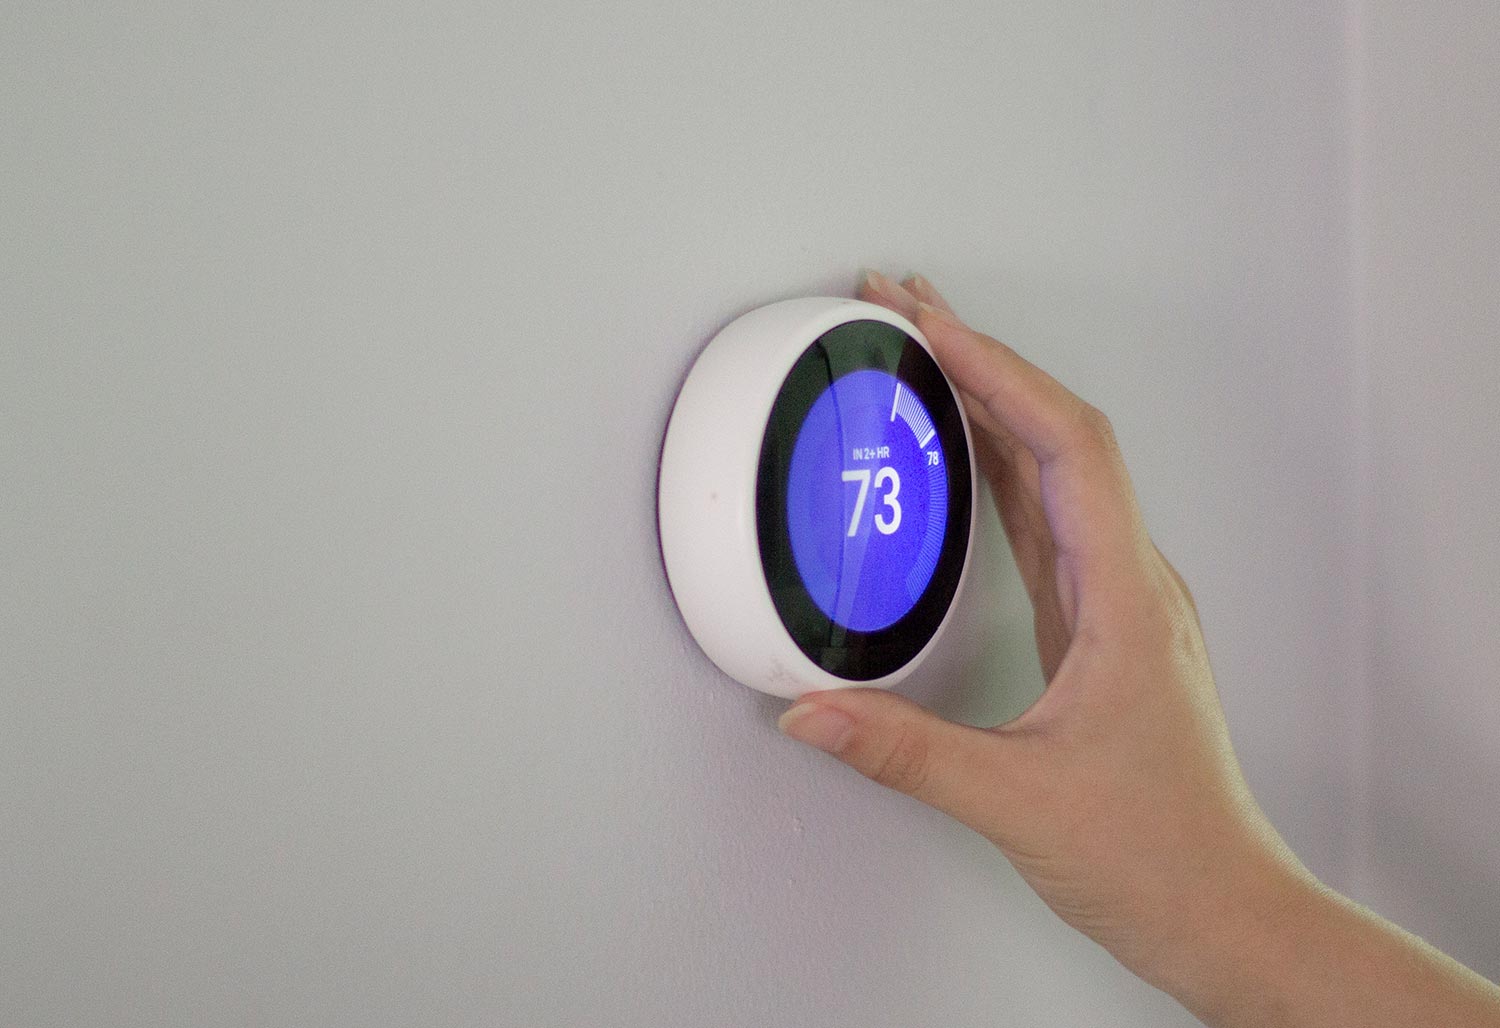 Using smart thermostat to change tempreture